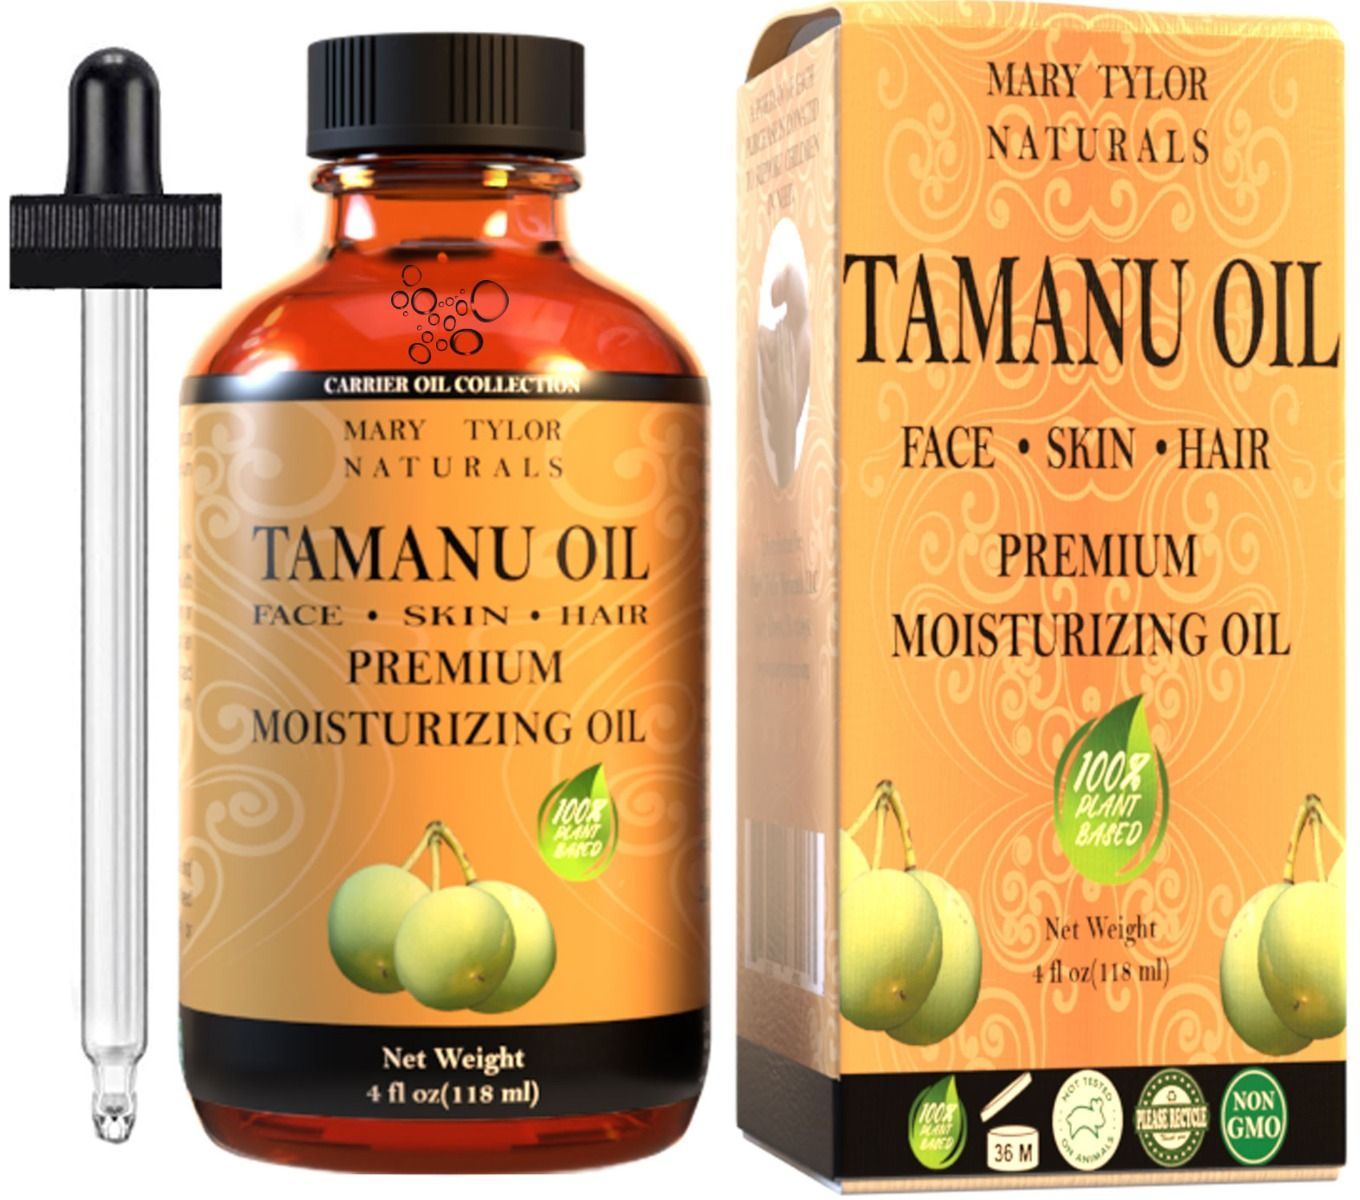 Tamanu Oil Before & After Erin's Faces #shorts - YouTube